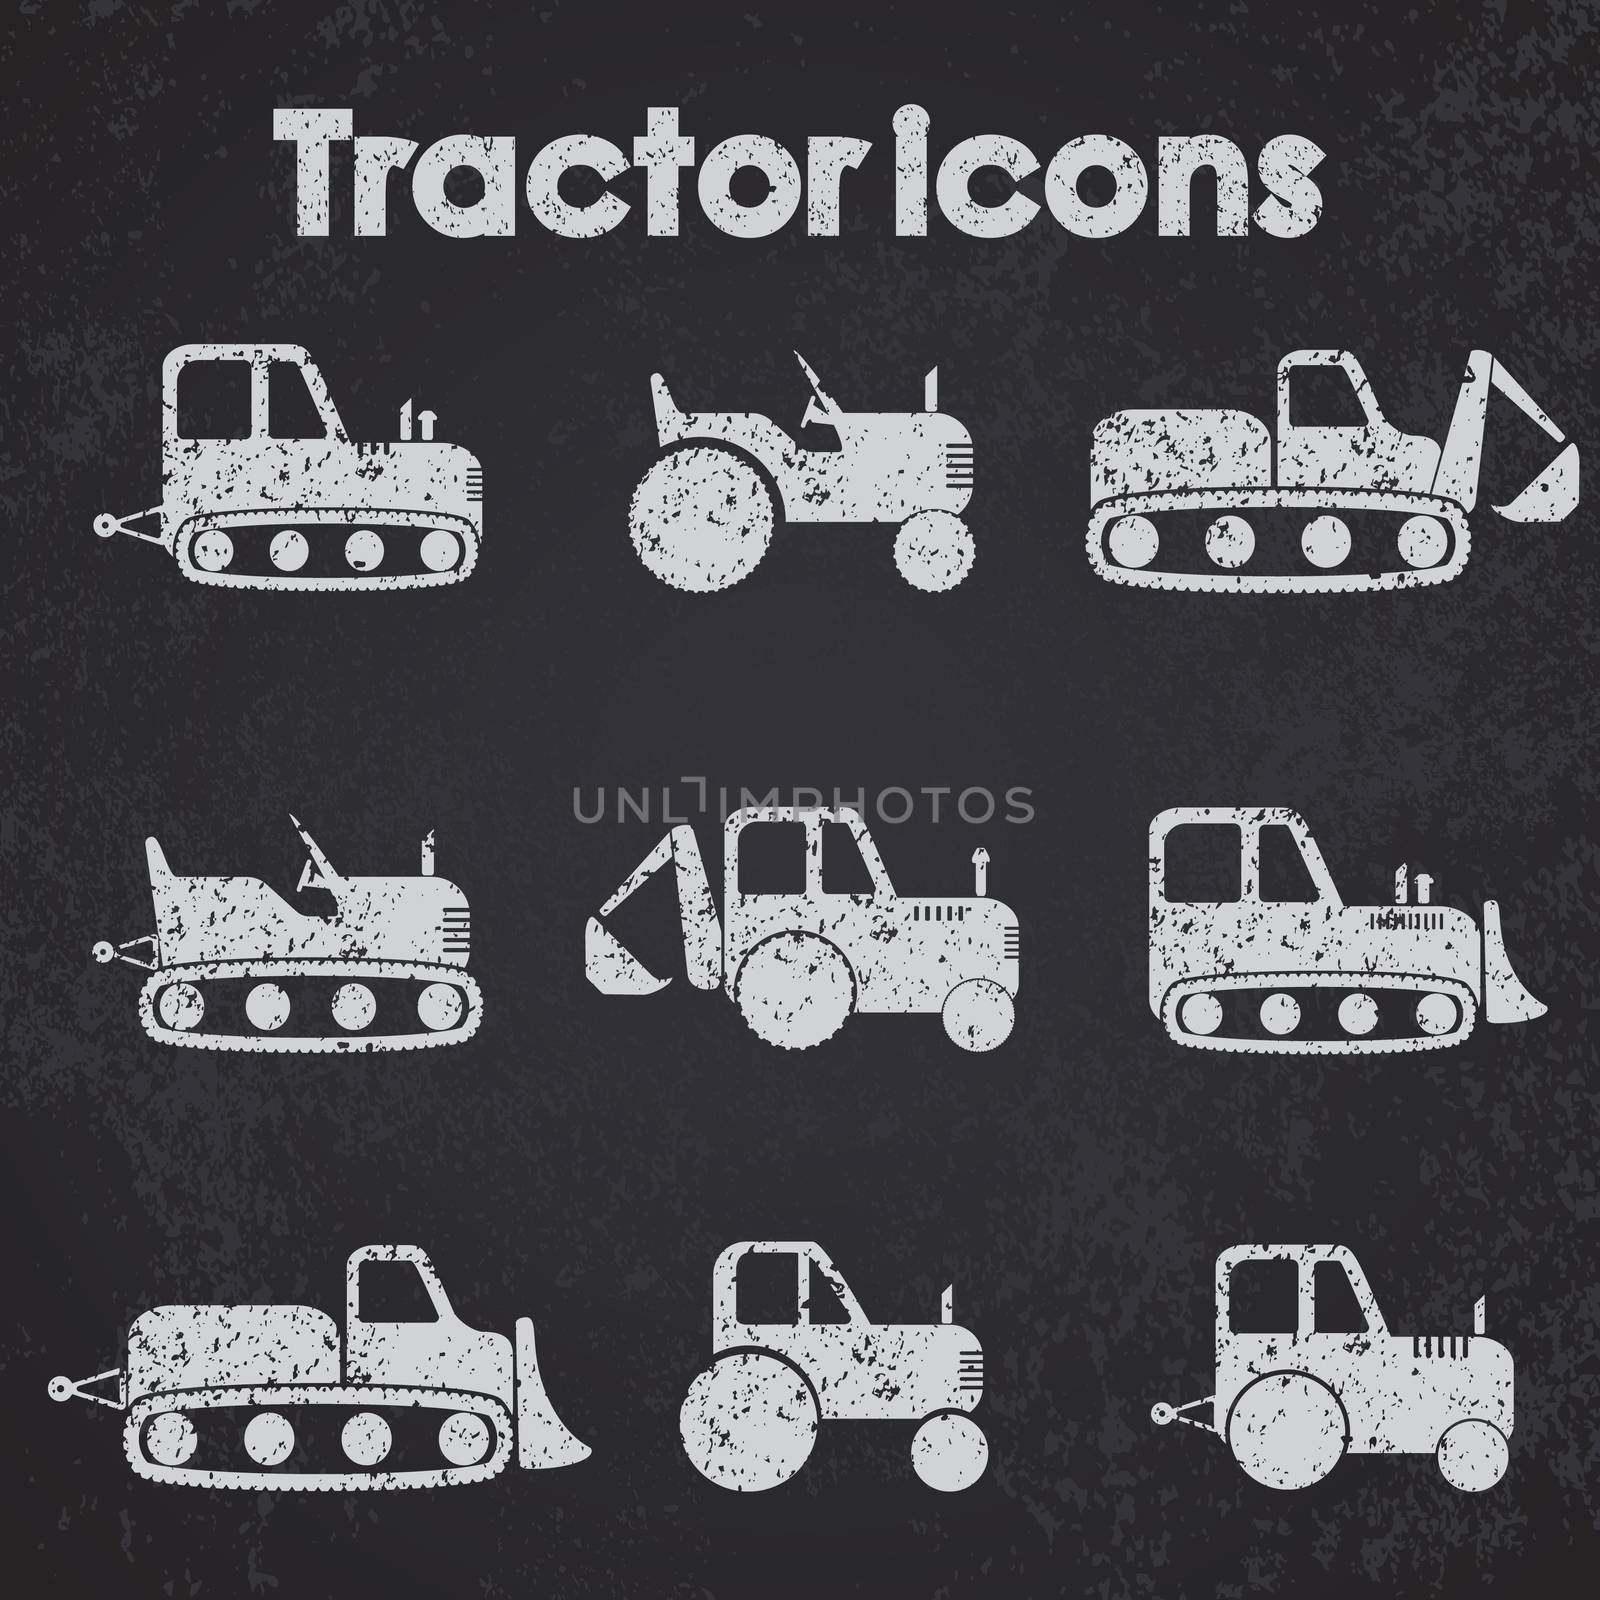 Various Tractor and Construction Machinery Icon set blackboard stylized.